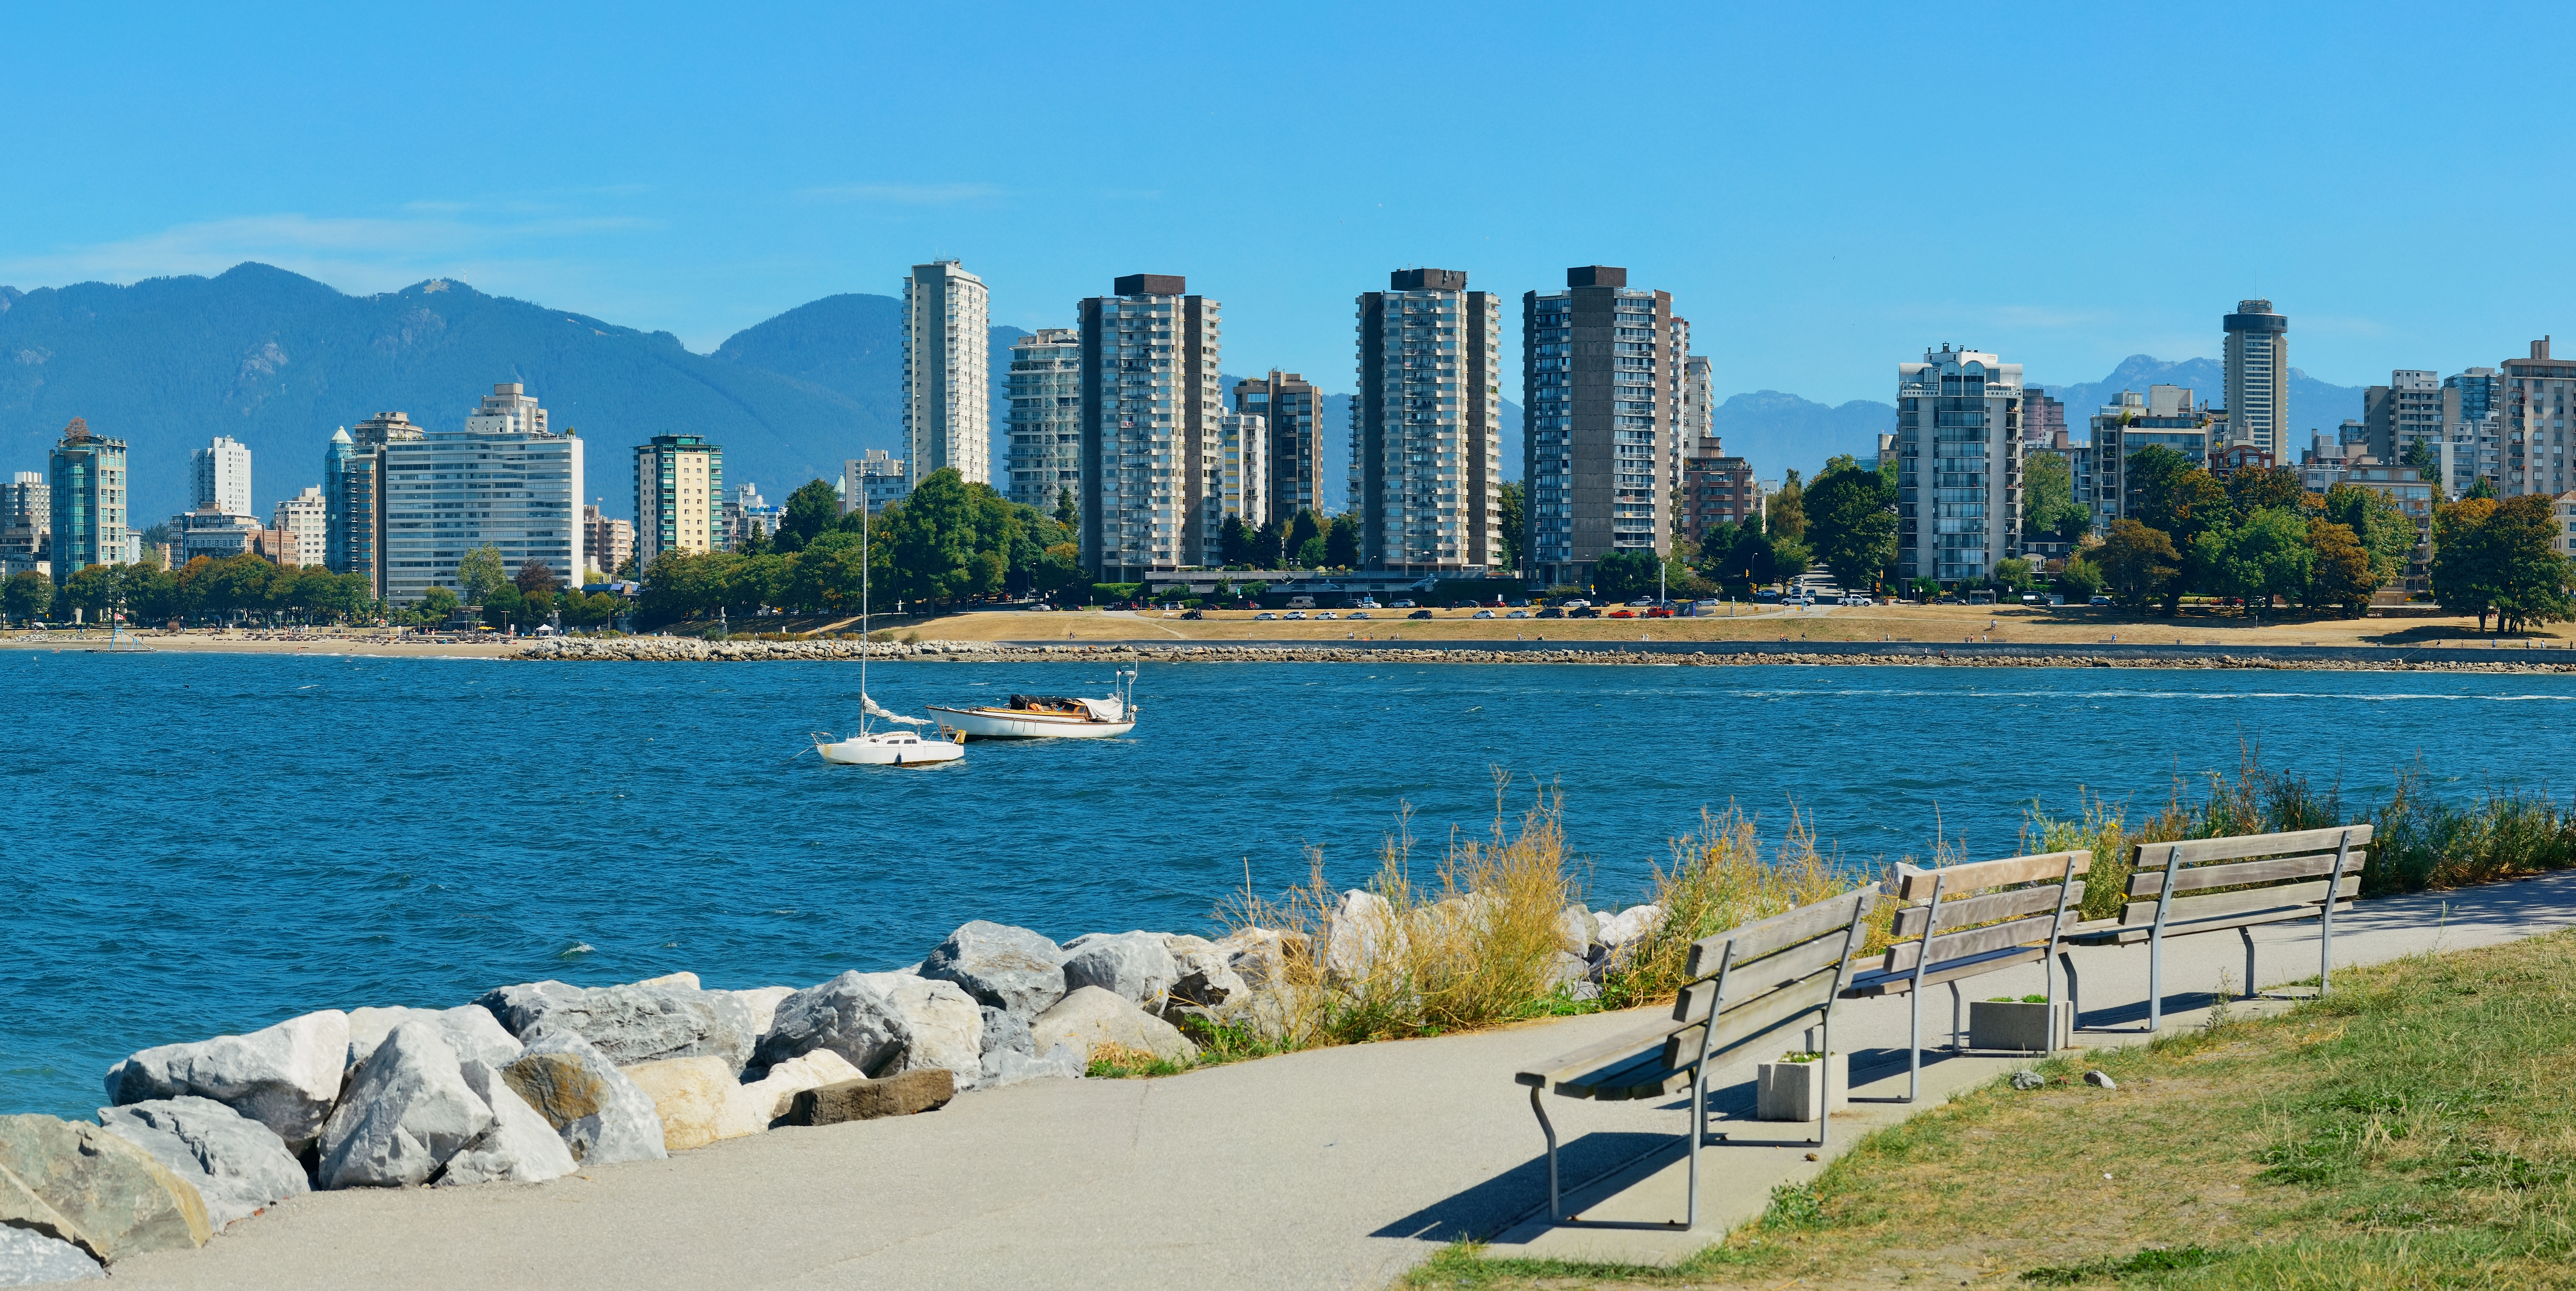 vancouver-city-skyline-waterfront-with-bench-park.jpg (15.65 MB)